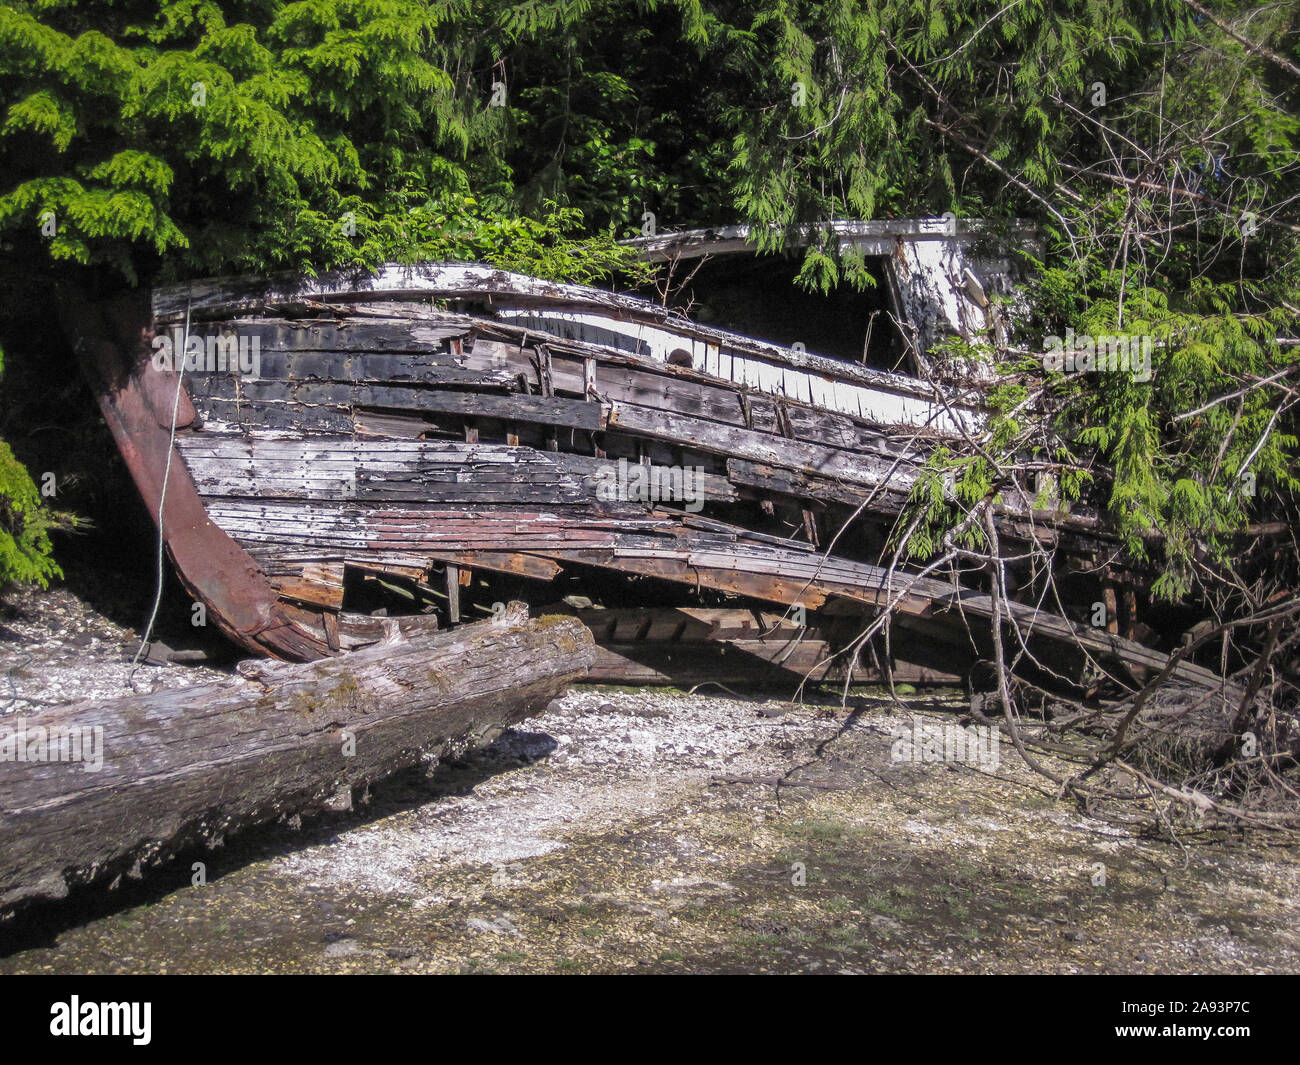 Half hidden by encroaching forest, an old wooden boat lies wrecked and decaying on a shell midden beach on Gilford Island, British Columbia. Stock Photo